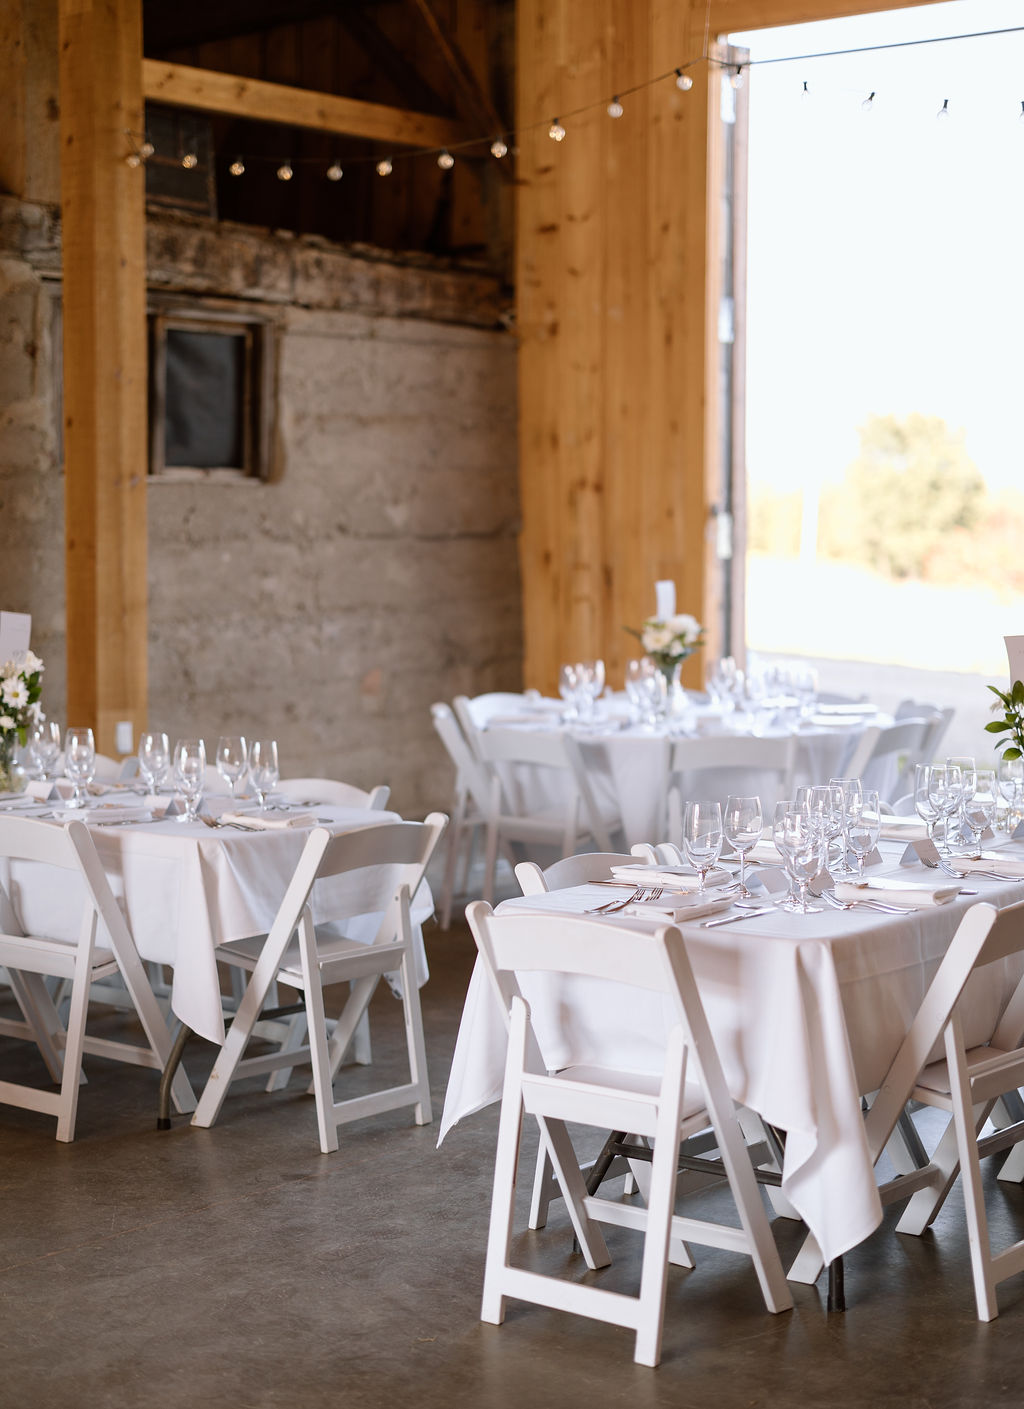 Reception setup in the barn